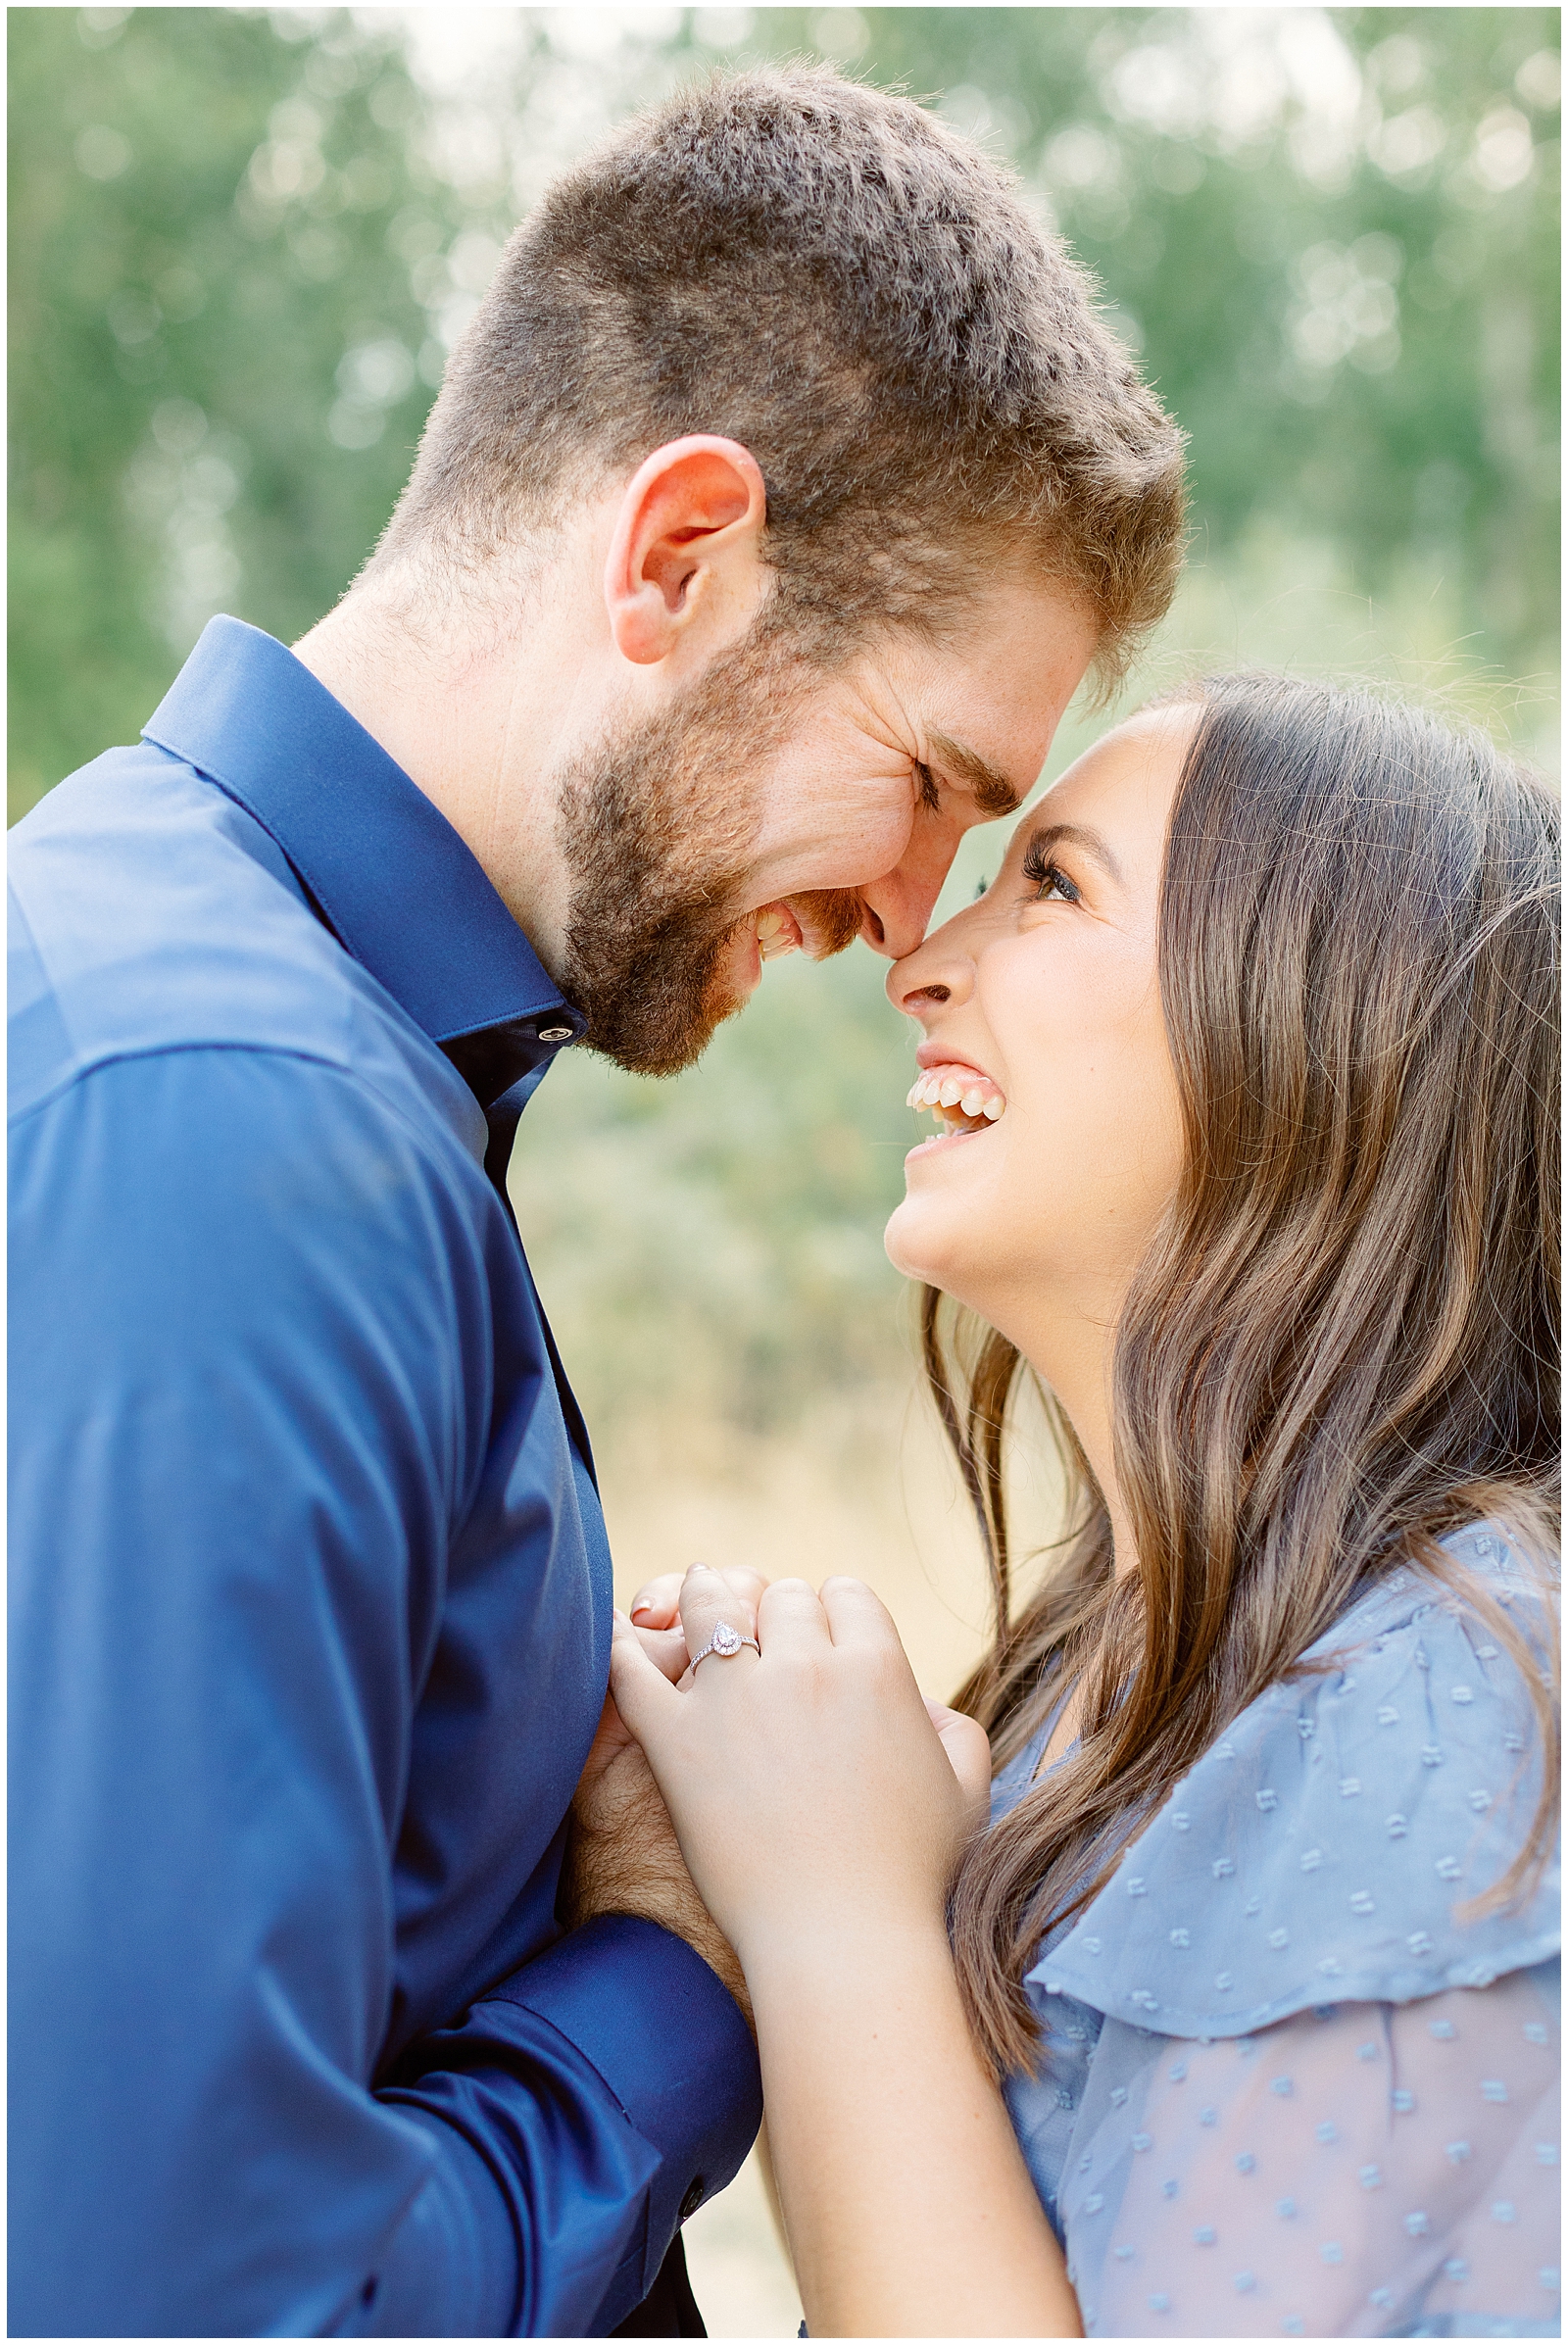 Romantic Summer Foothills Engagement Session in Boise Idaho